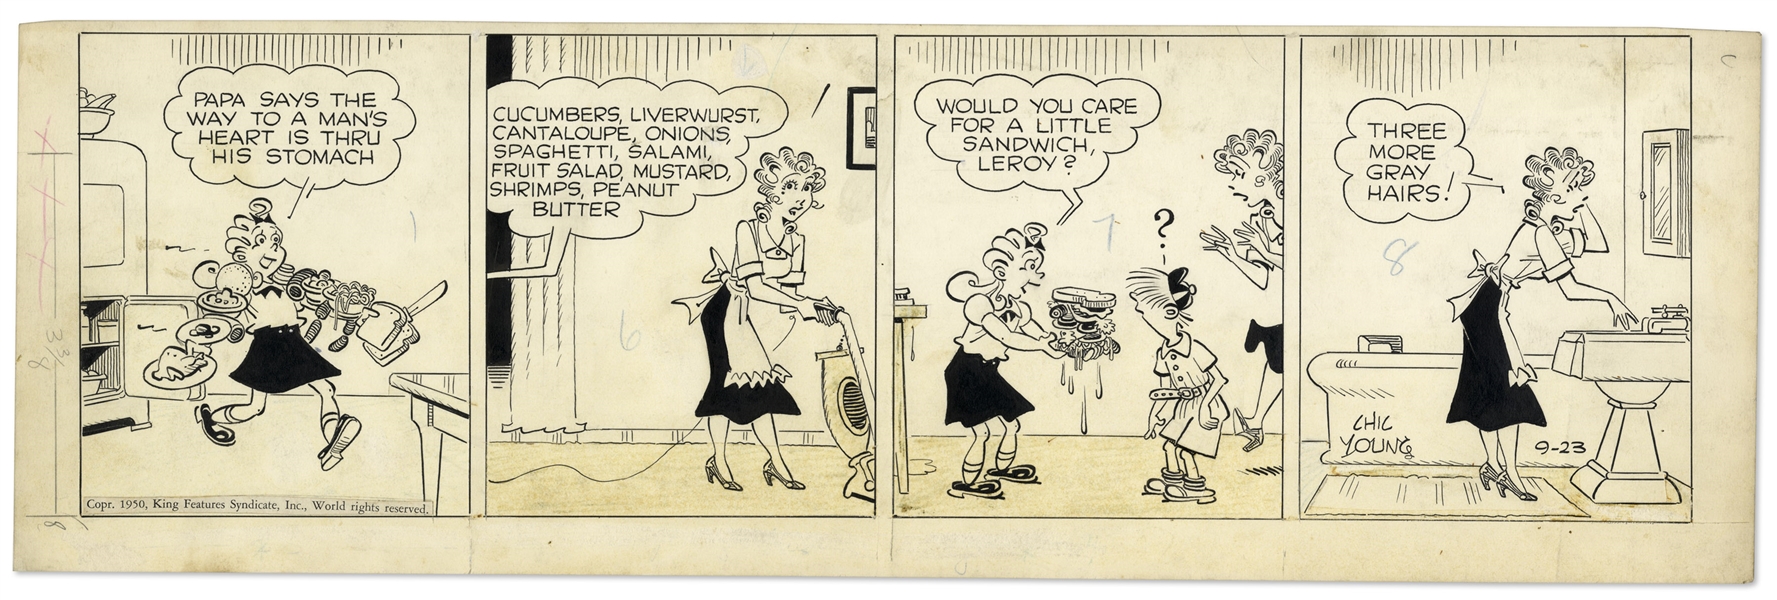 2 Chic Young Hand-Drawn ''Blondie'' Comic Strips From 1950 Titled ''Nip Him in the Bud, Blondie!'' and ''Why Mothers Dye Young''